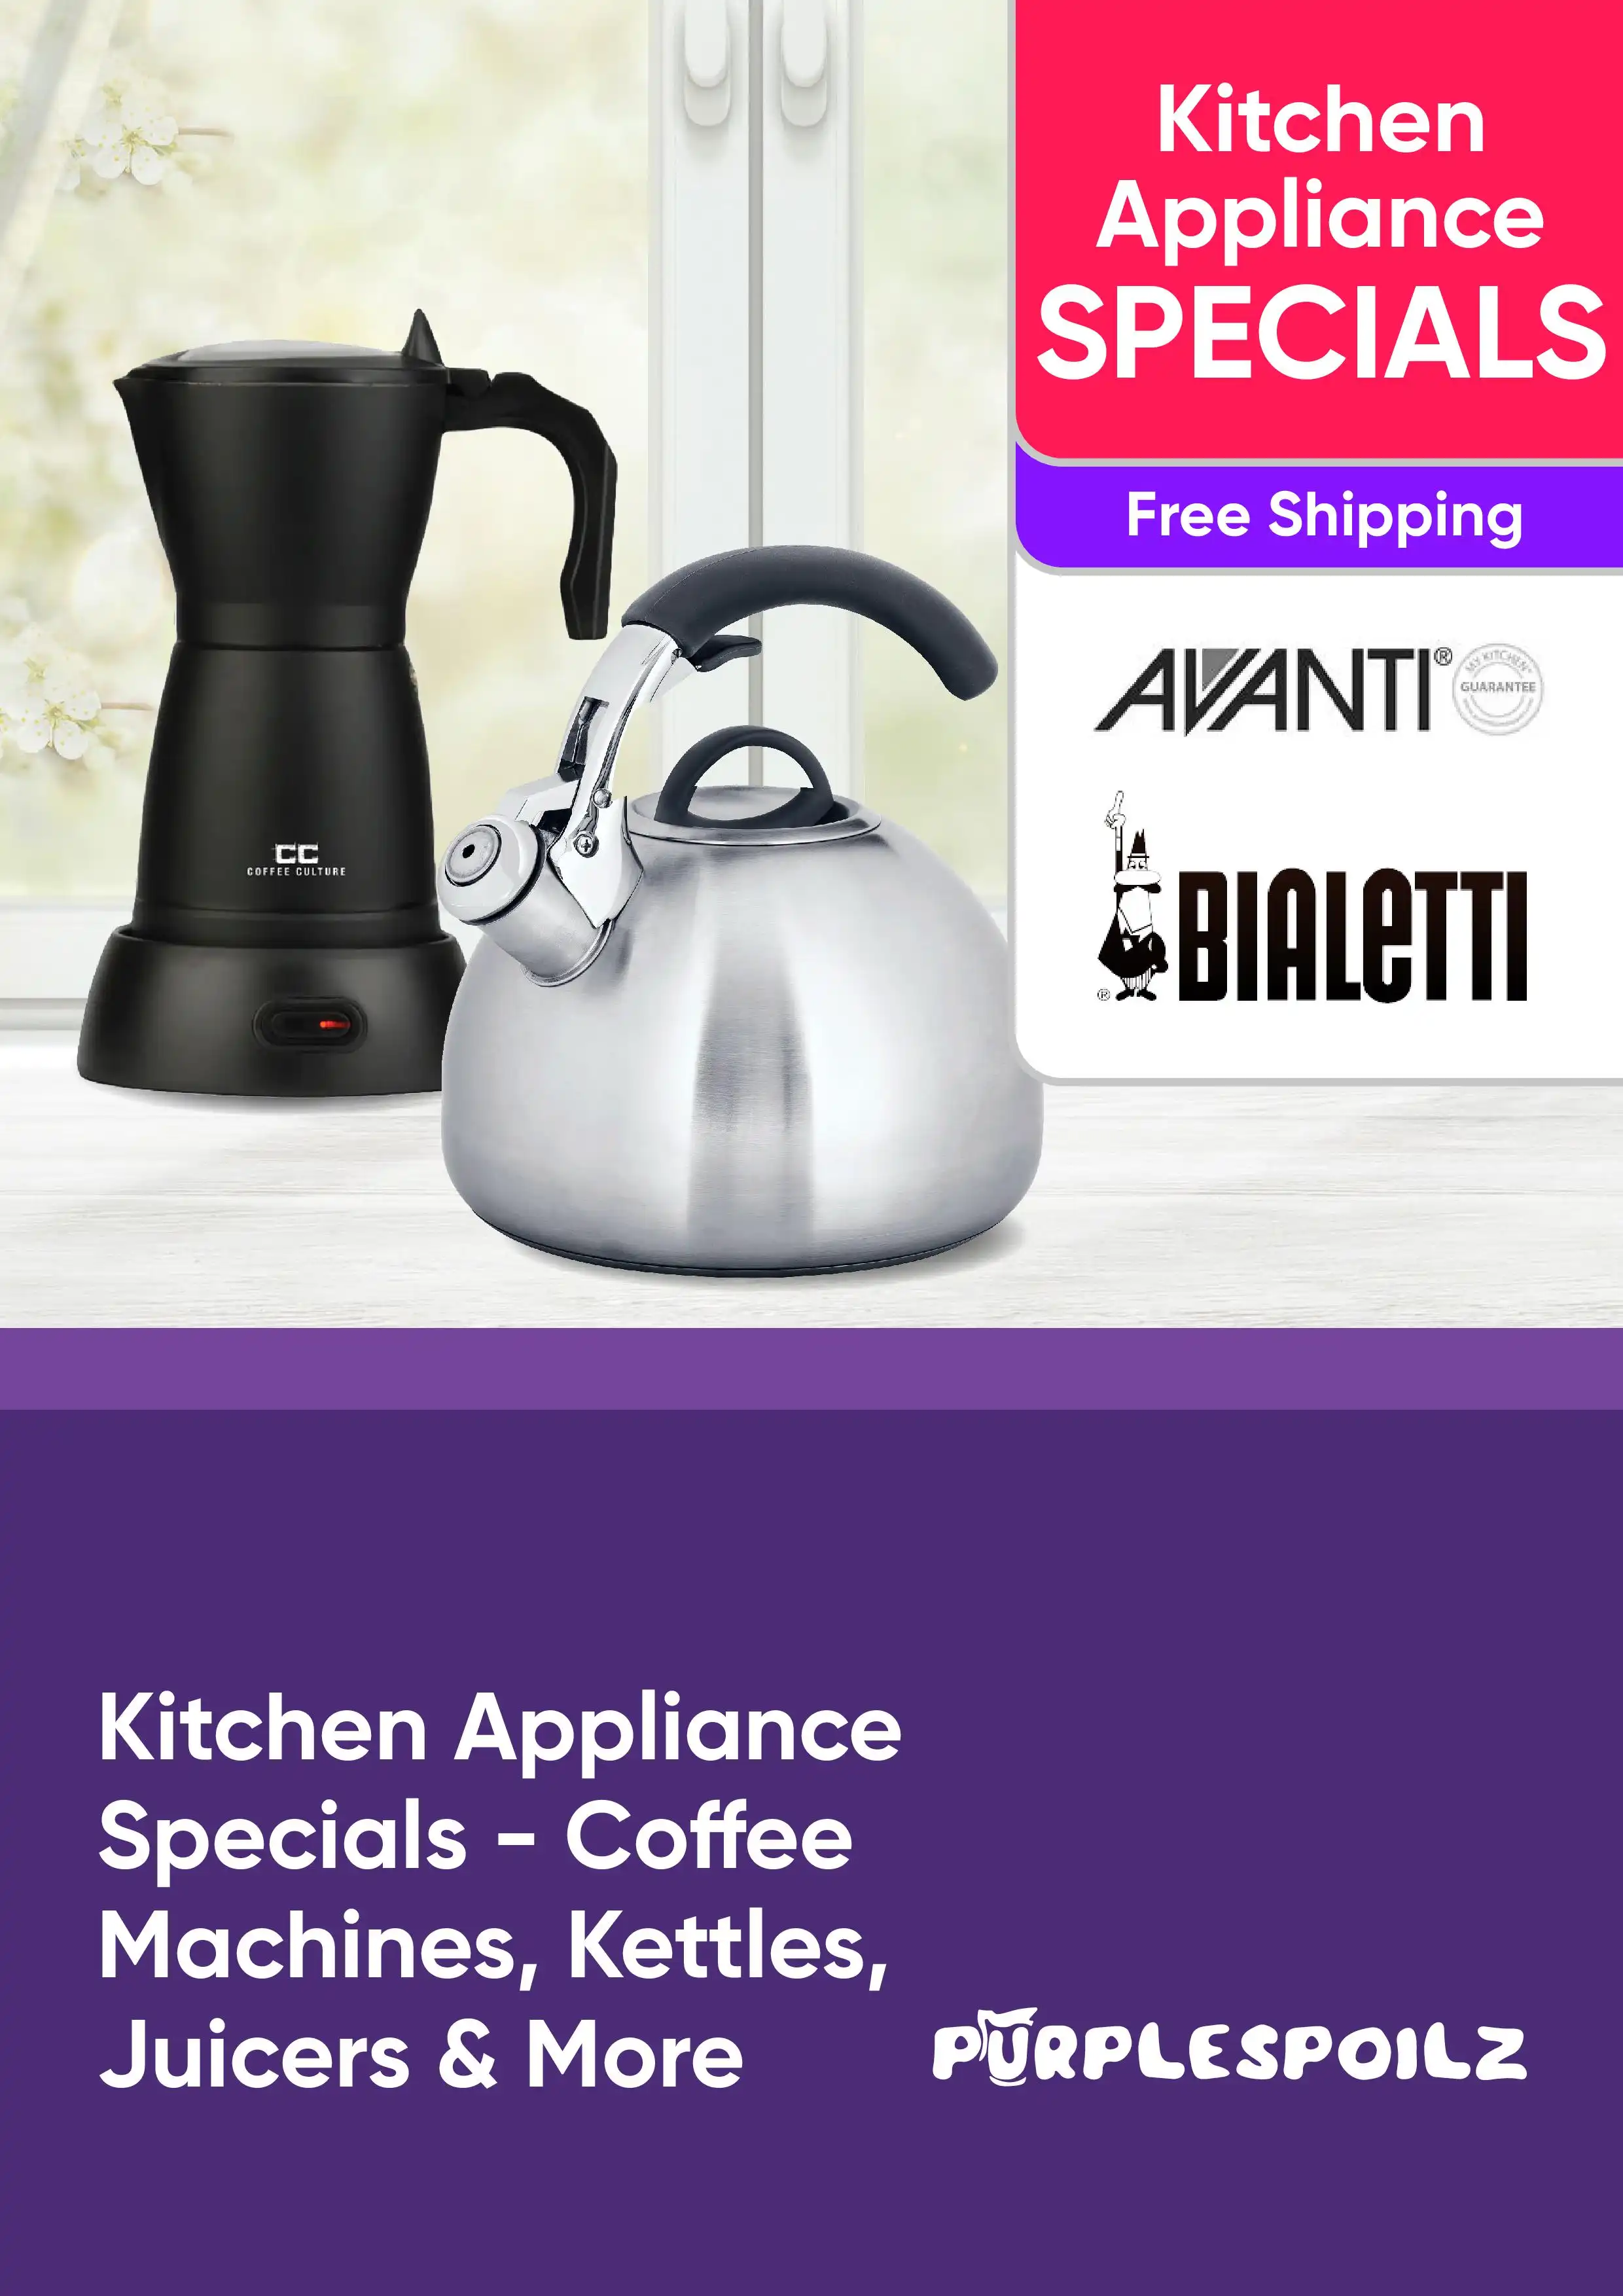 Kitchen Appliance and Accessories Specials - Coffee Machines, Kettles, Juicers and More - Free Shipping